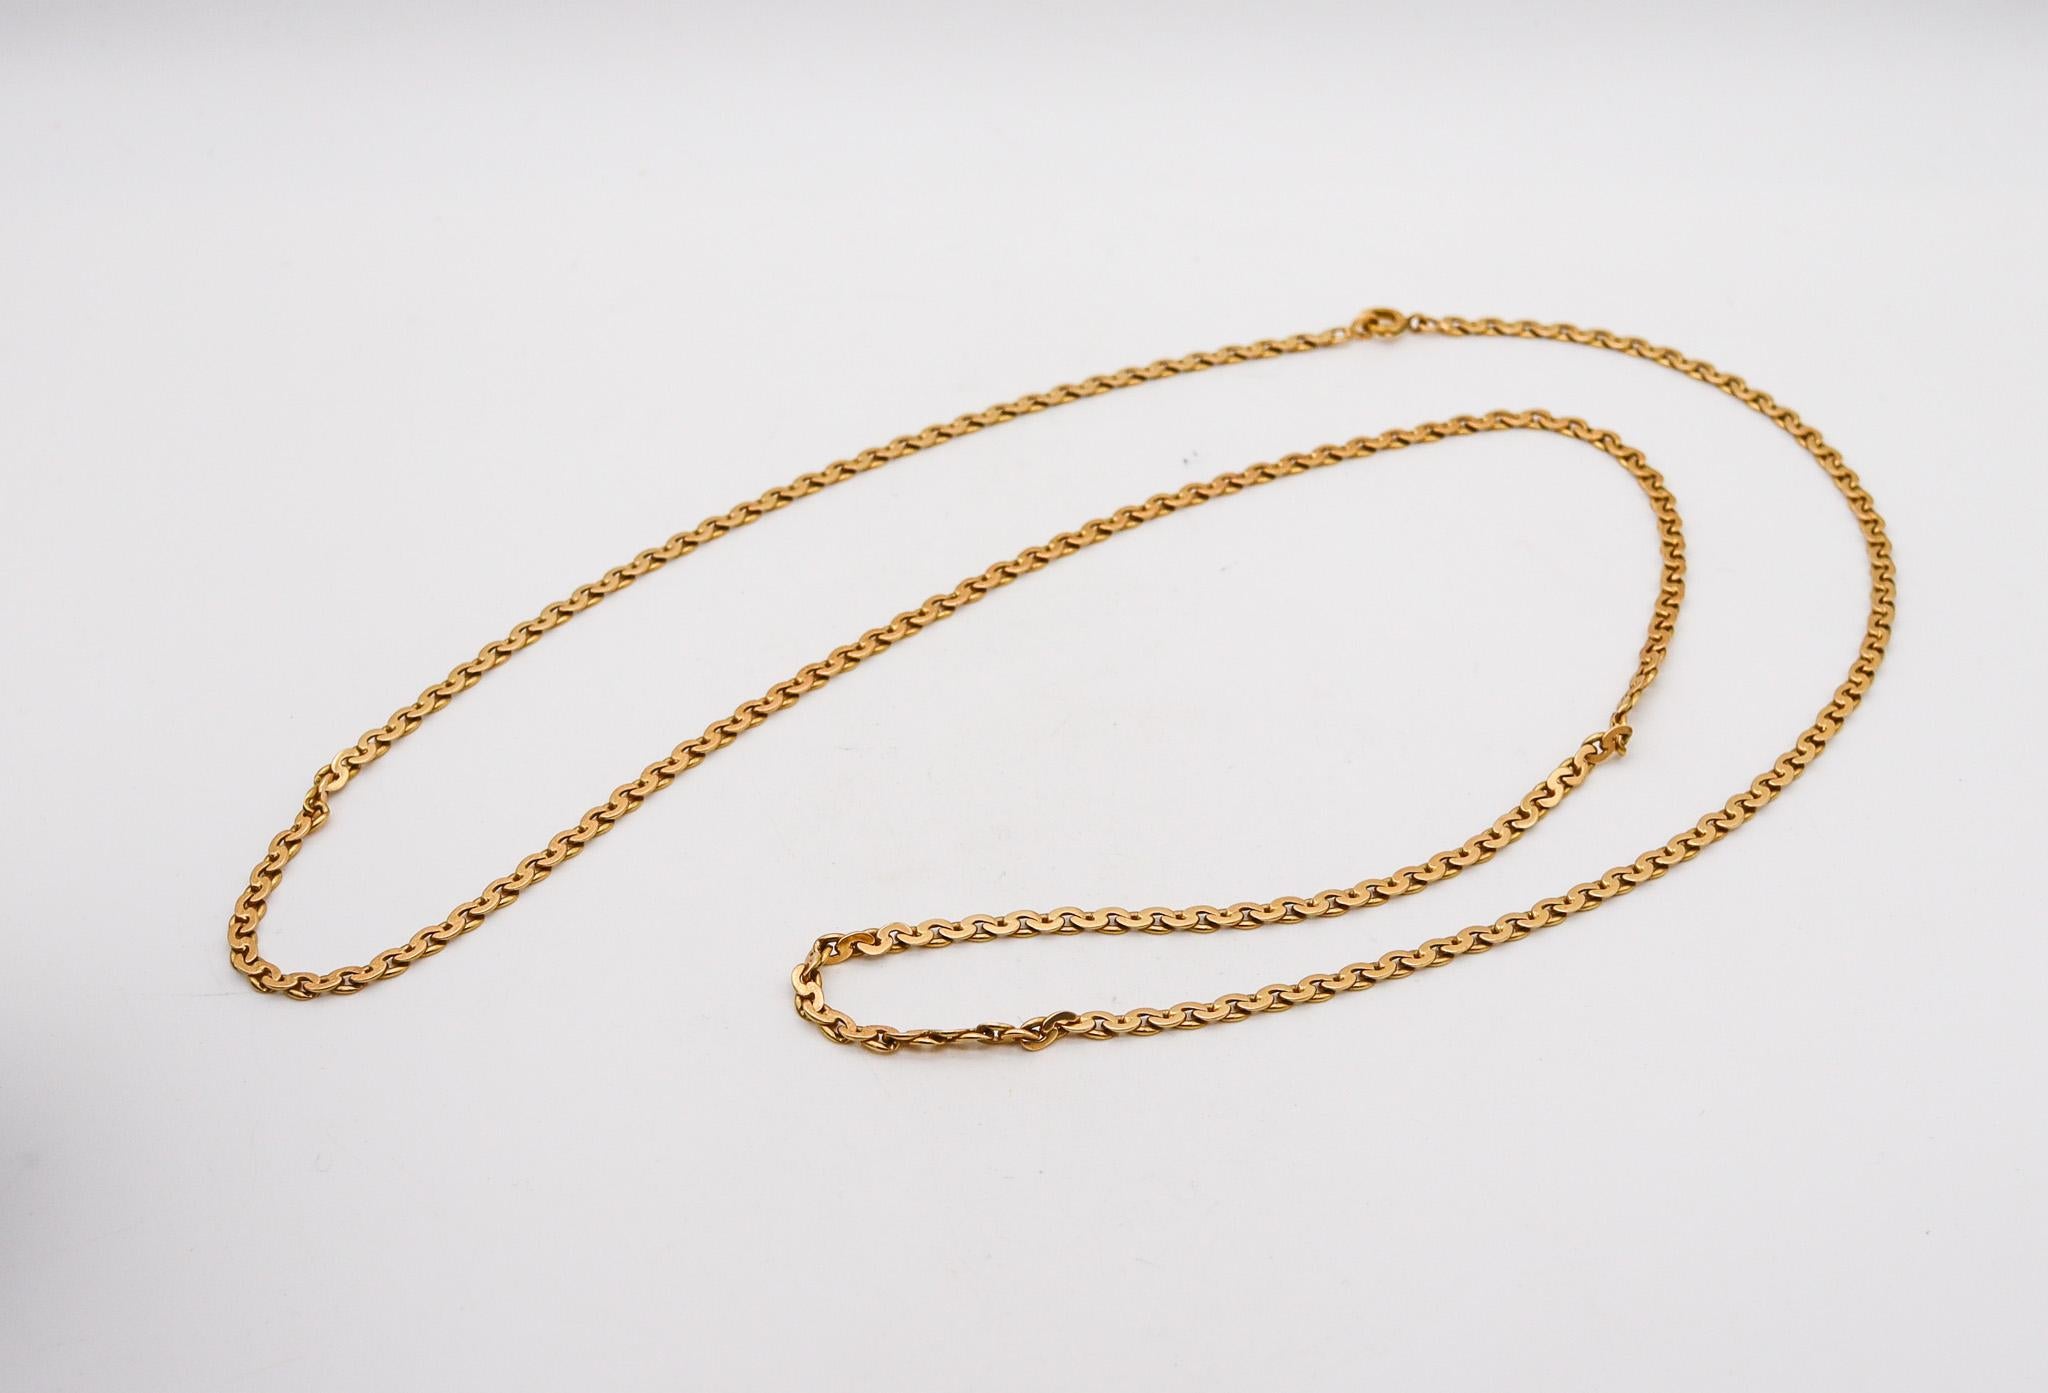 Marchisio Napoleone 1935 Italian Art Deco Long Chain In Solid 18Kt Yellow Gold In Excellent Condition For Sale In Miami, FL